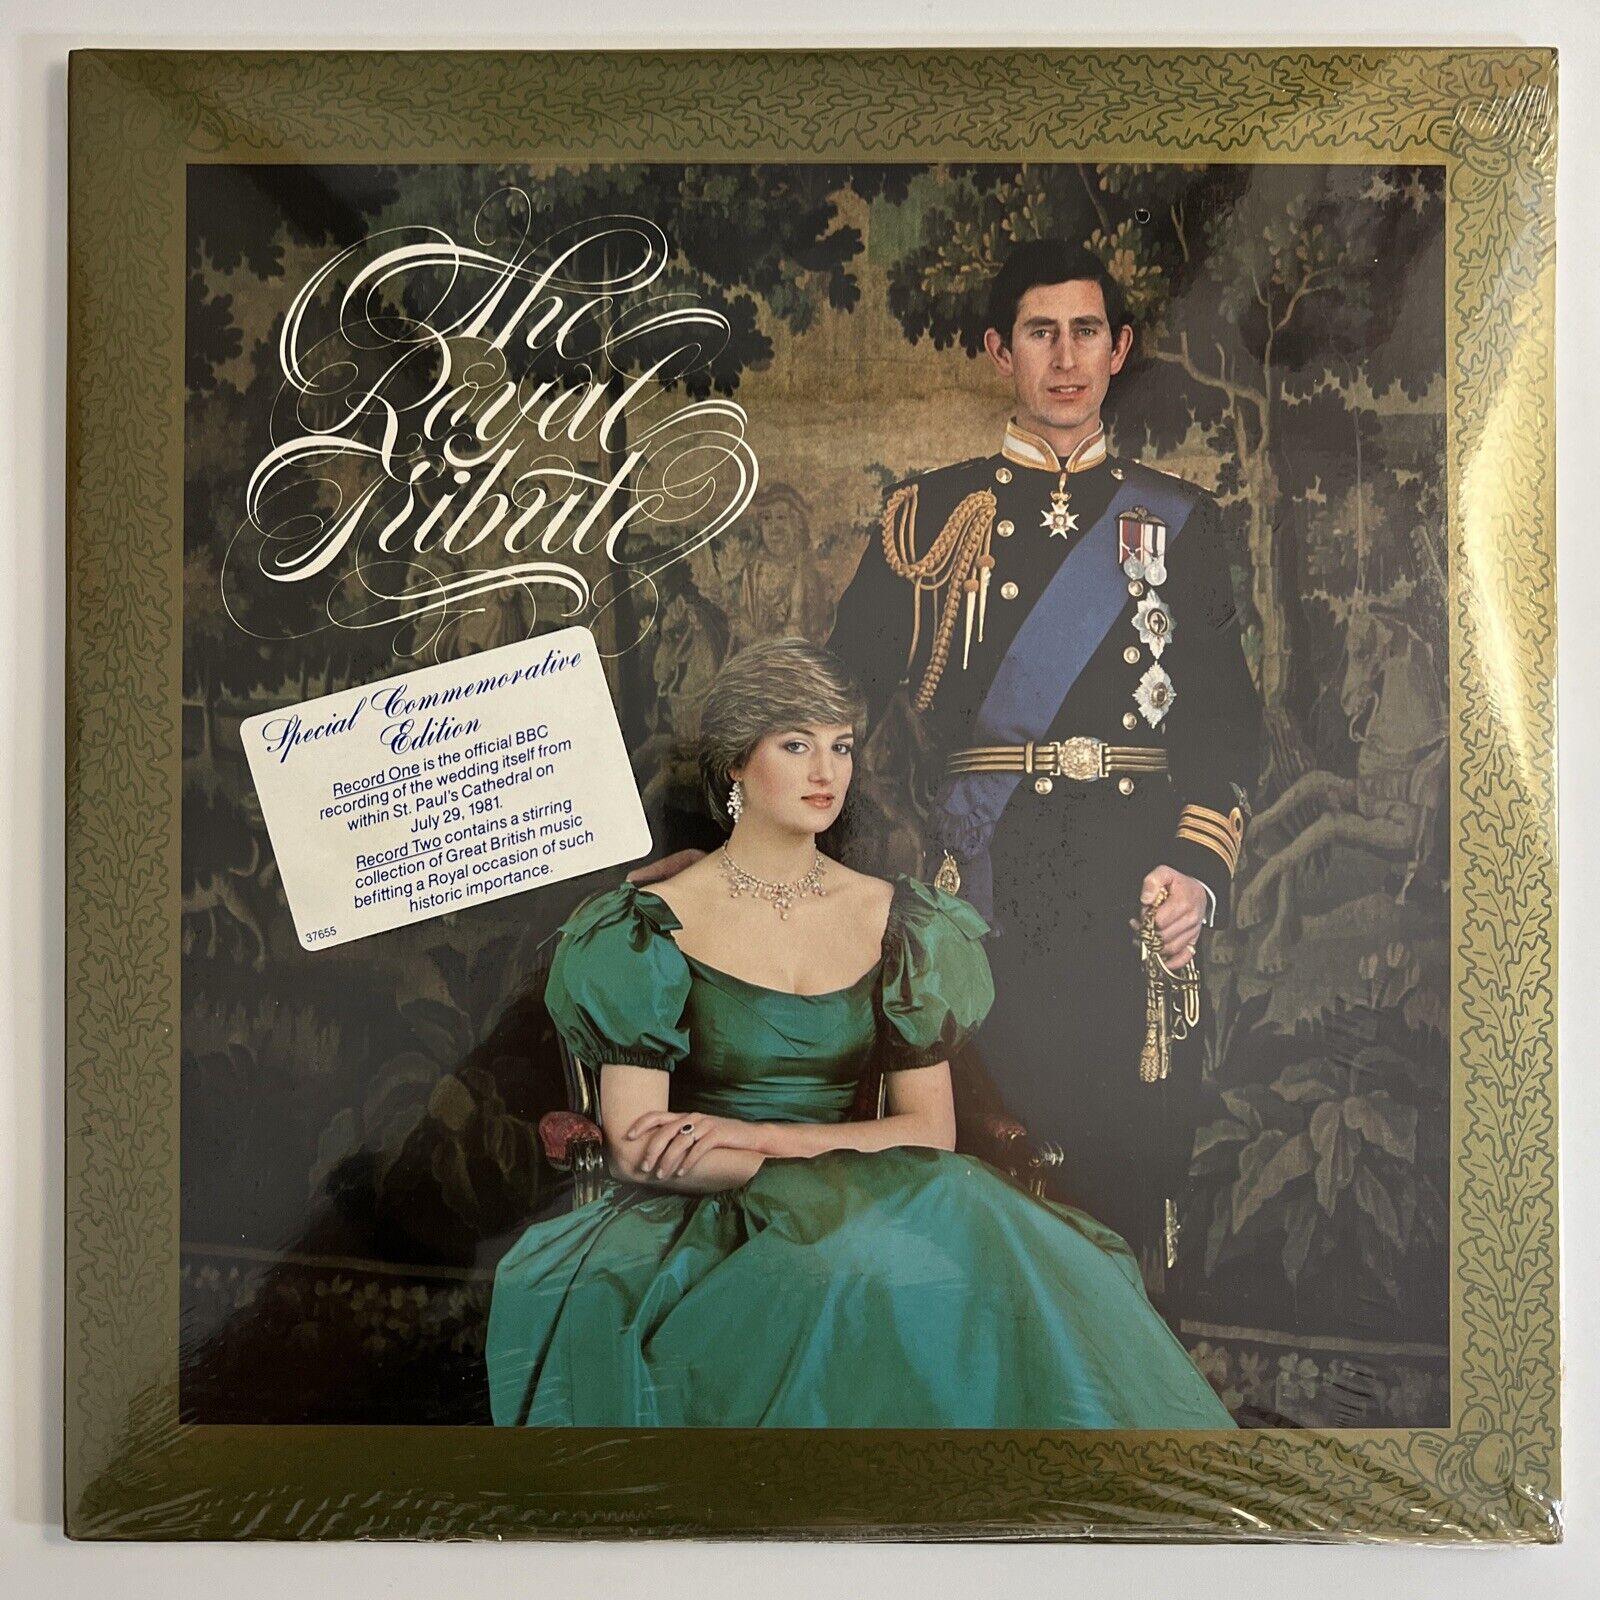 The Royal Tribute “Special Commemorative” PROMO/SEALED/LP Columbia C237655 (NM)